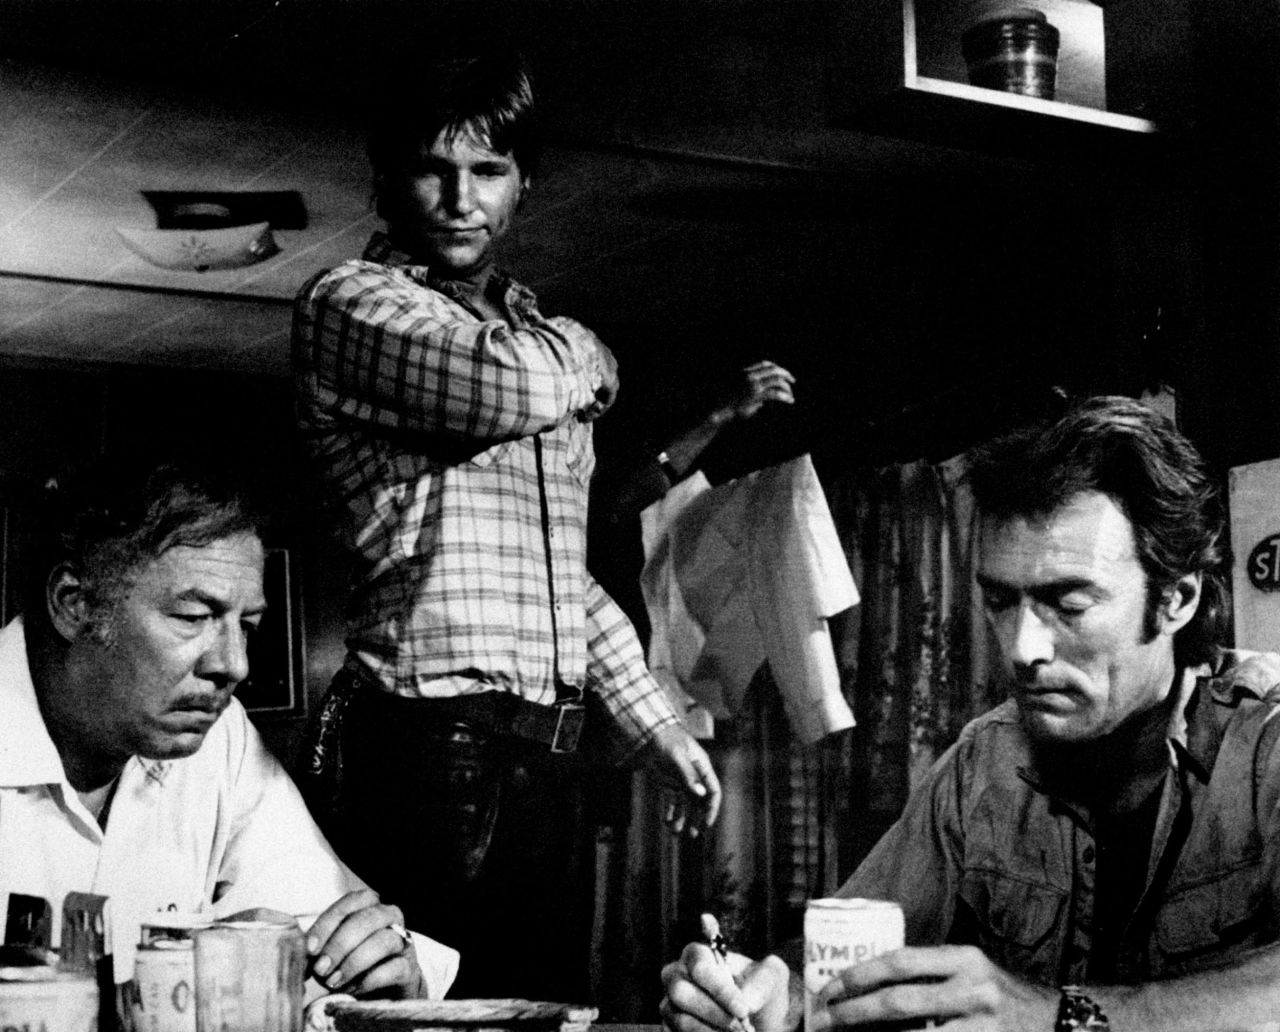 Bridges, center, looks over George Kennedy, left, and Clint Eastwood during the 1974 film "Thunderbolt and Lightfoot." Bridges' performance in the movie earned him another Oscar nomination.